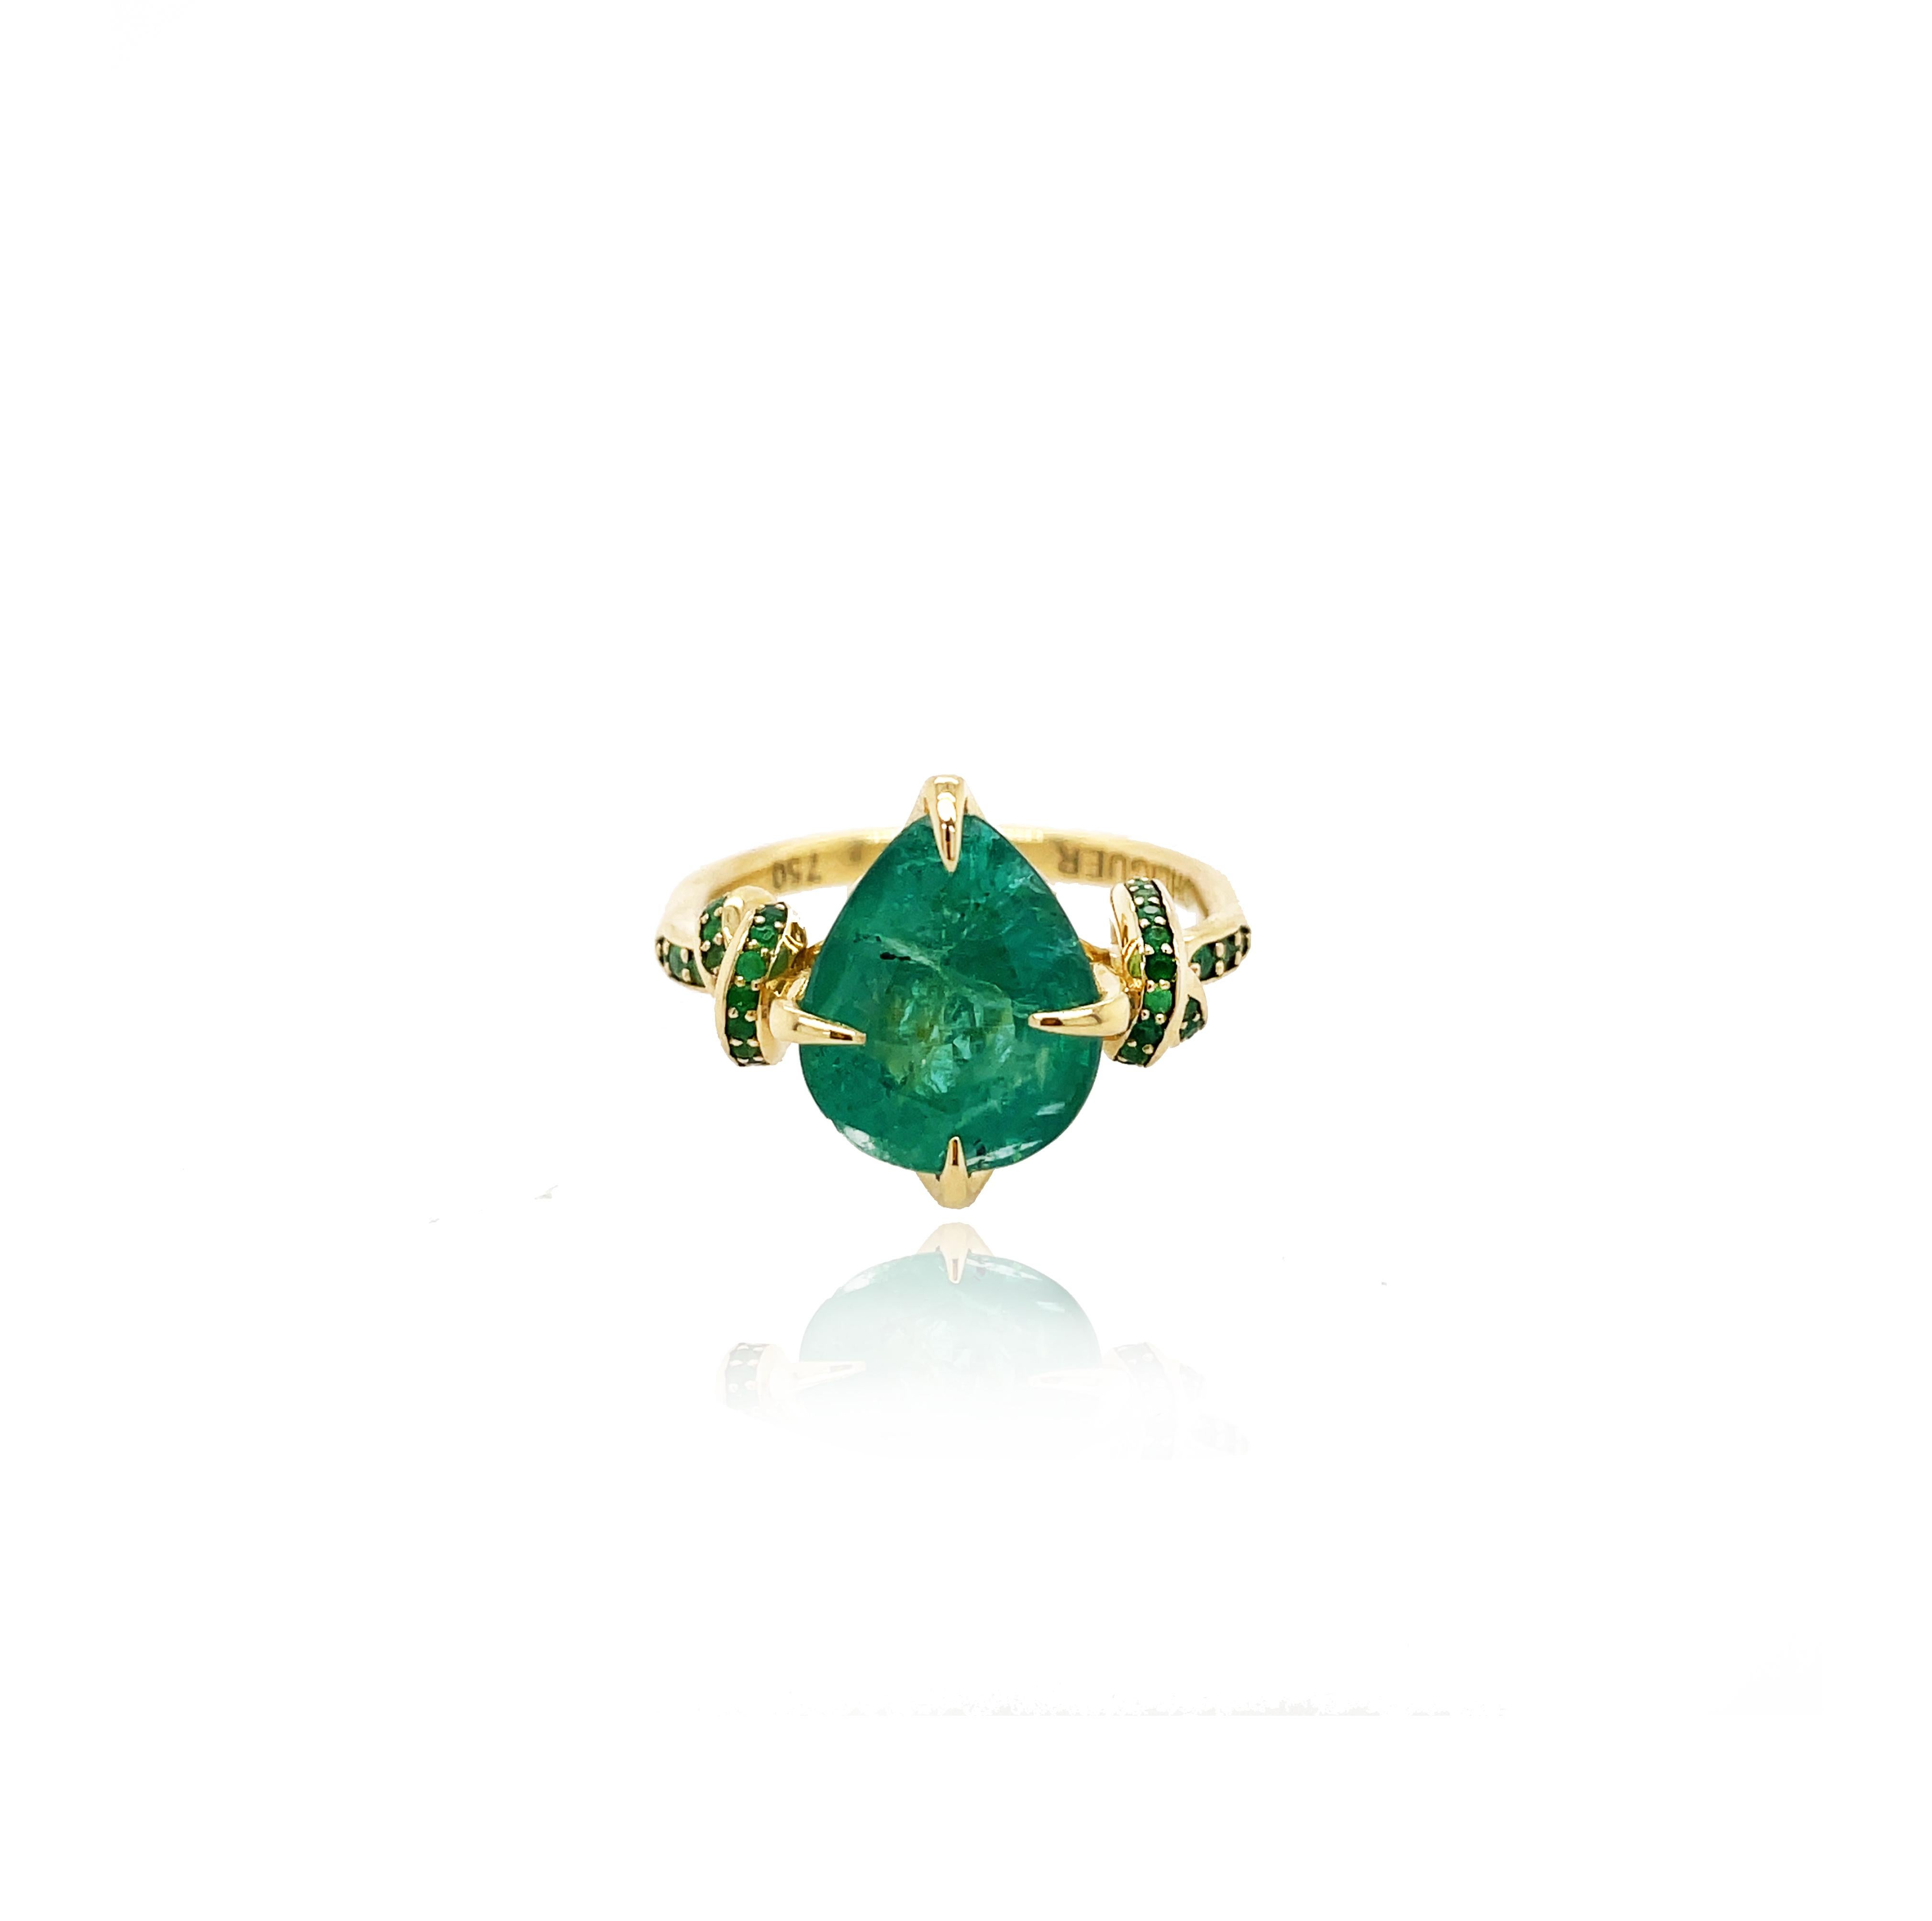 
Glamorously bold and unabashedly seductive. This showstopper one of a kind ring features a 4ct natural pear cut Emerald poised between sharp eagle style talons and embraced by powerful-gold, emerald encrusted ropes, converging to two knots on